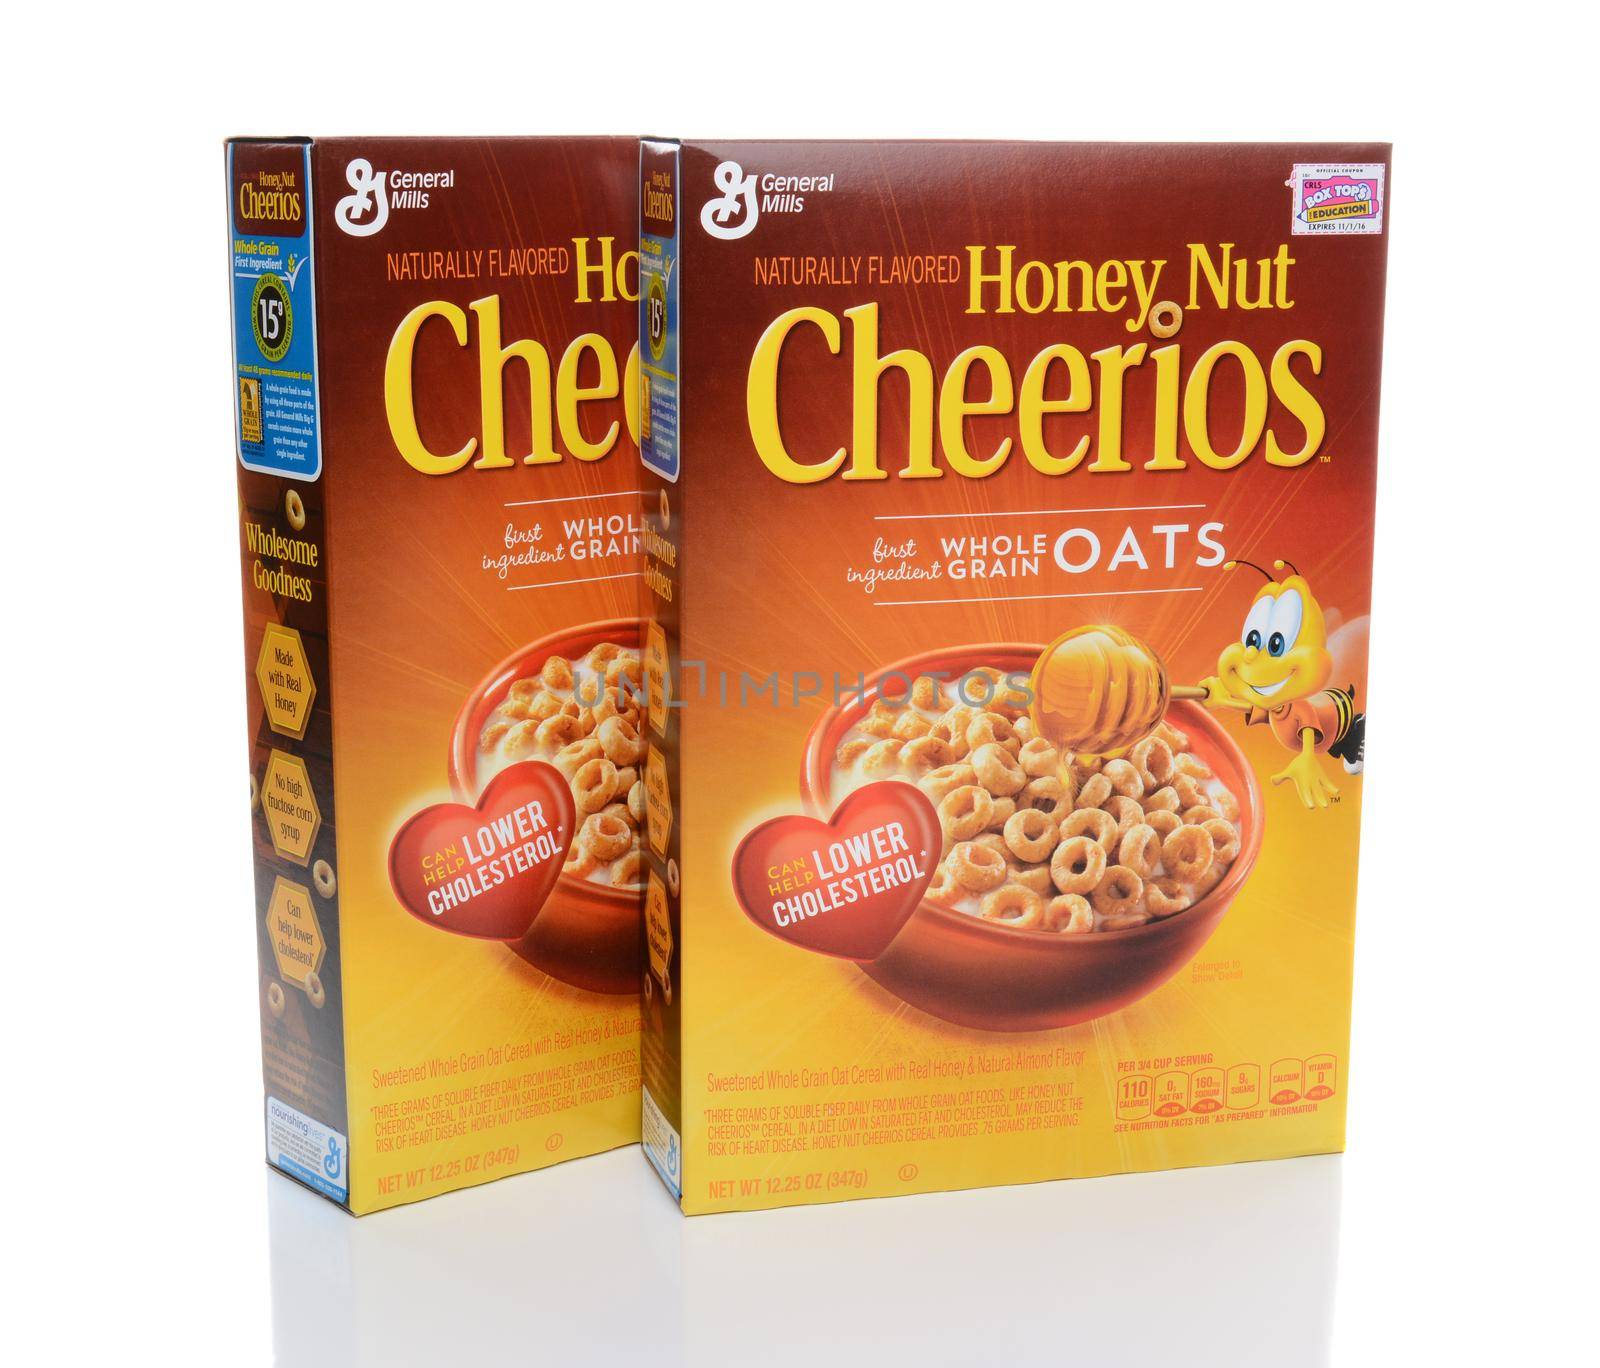 IRVINE, CA - FEBRUARY 19, 2015: Two boxes of Honey Nut Cheerios. Introduced in 1979 by General Mills it is a slightly sweeter version of the original Cheerios breakfast cereal.